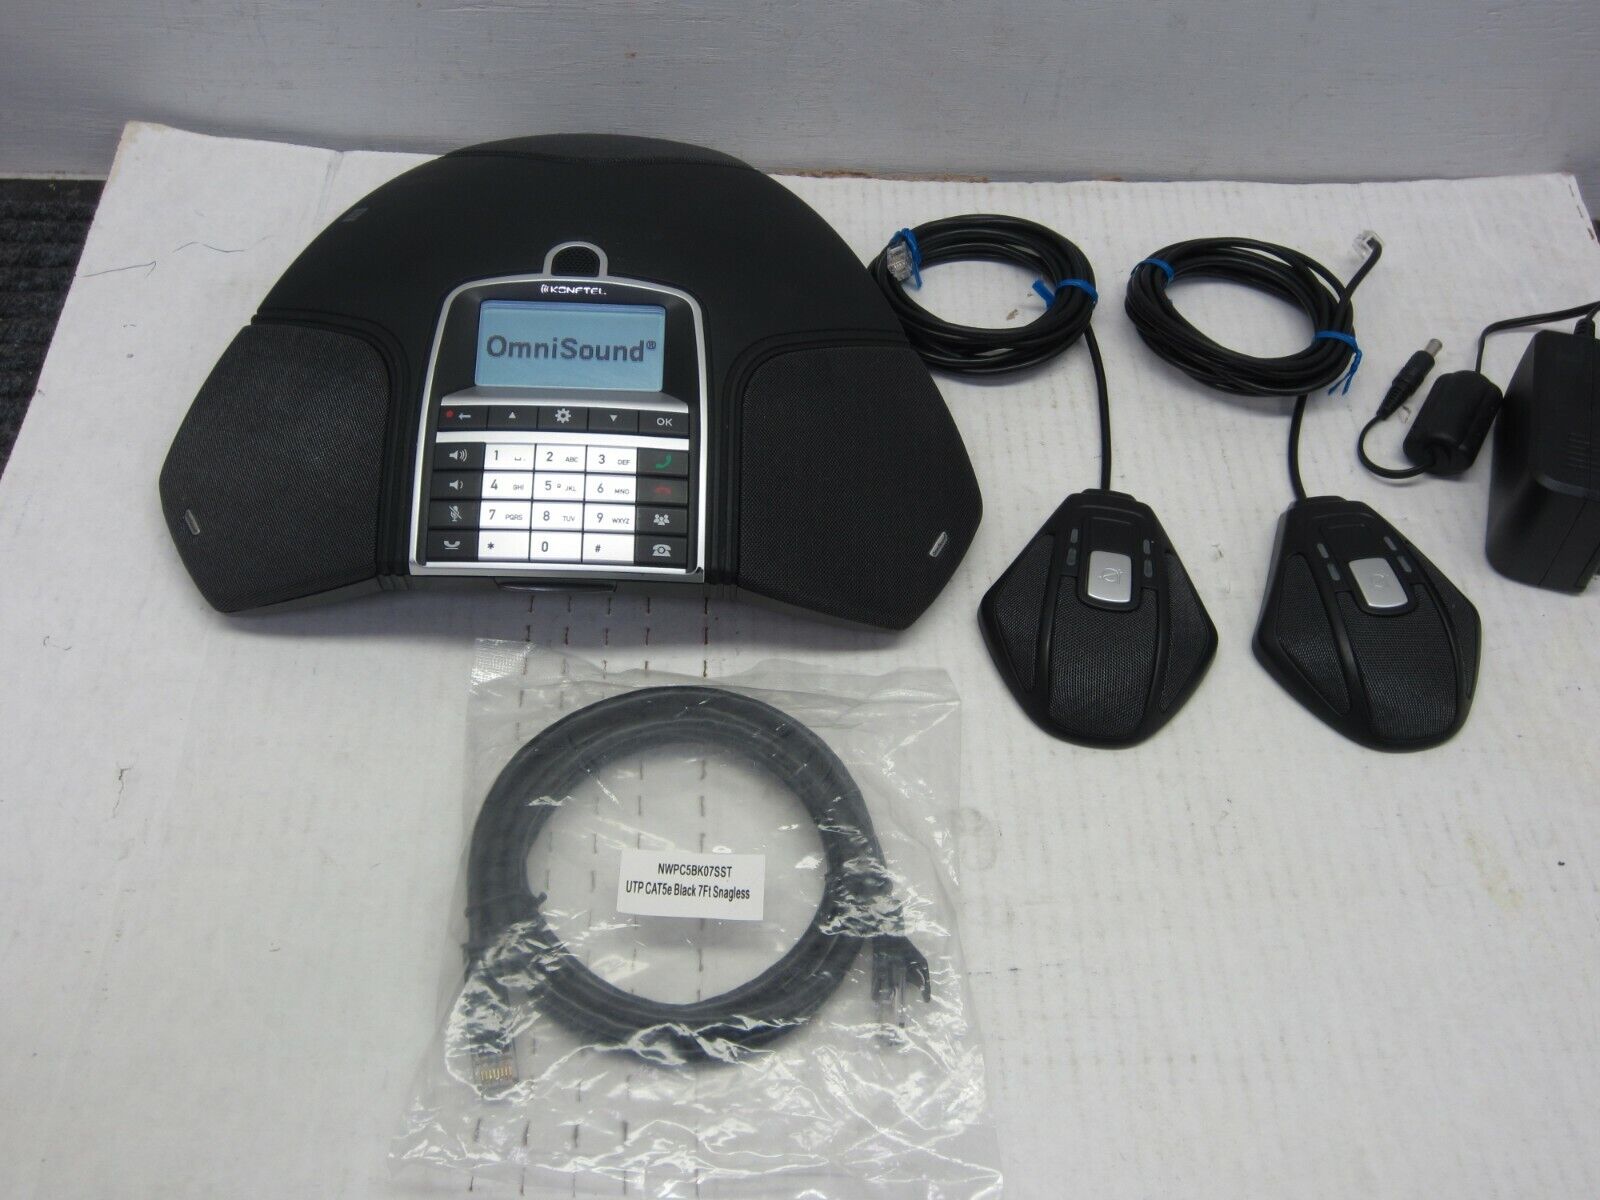 Konftel 300IPx Conference Phone(910101084) W/ 2 Expansion Microphones(900102113)